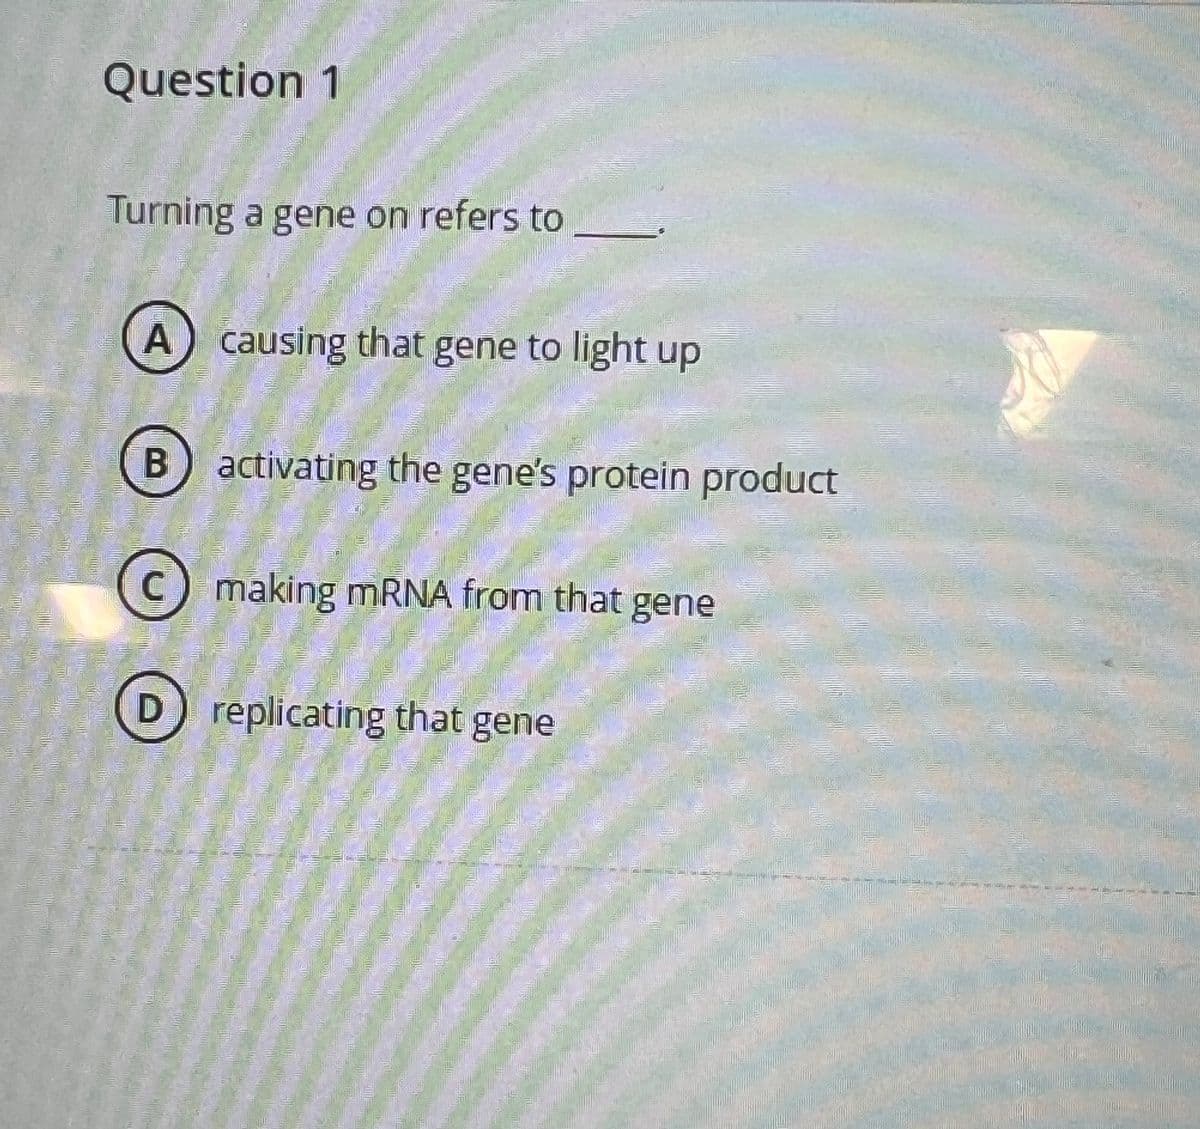 Question 1
Turning a gene on refers to
A causing that gene to light up
B
activating the gene's protein product
C) making mRNA from that gene
D
replicating that gene
13
GG